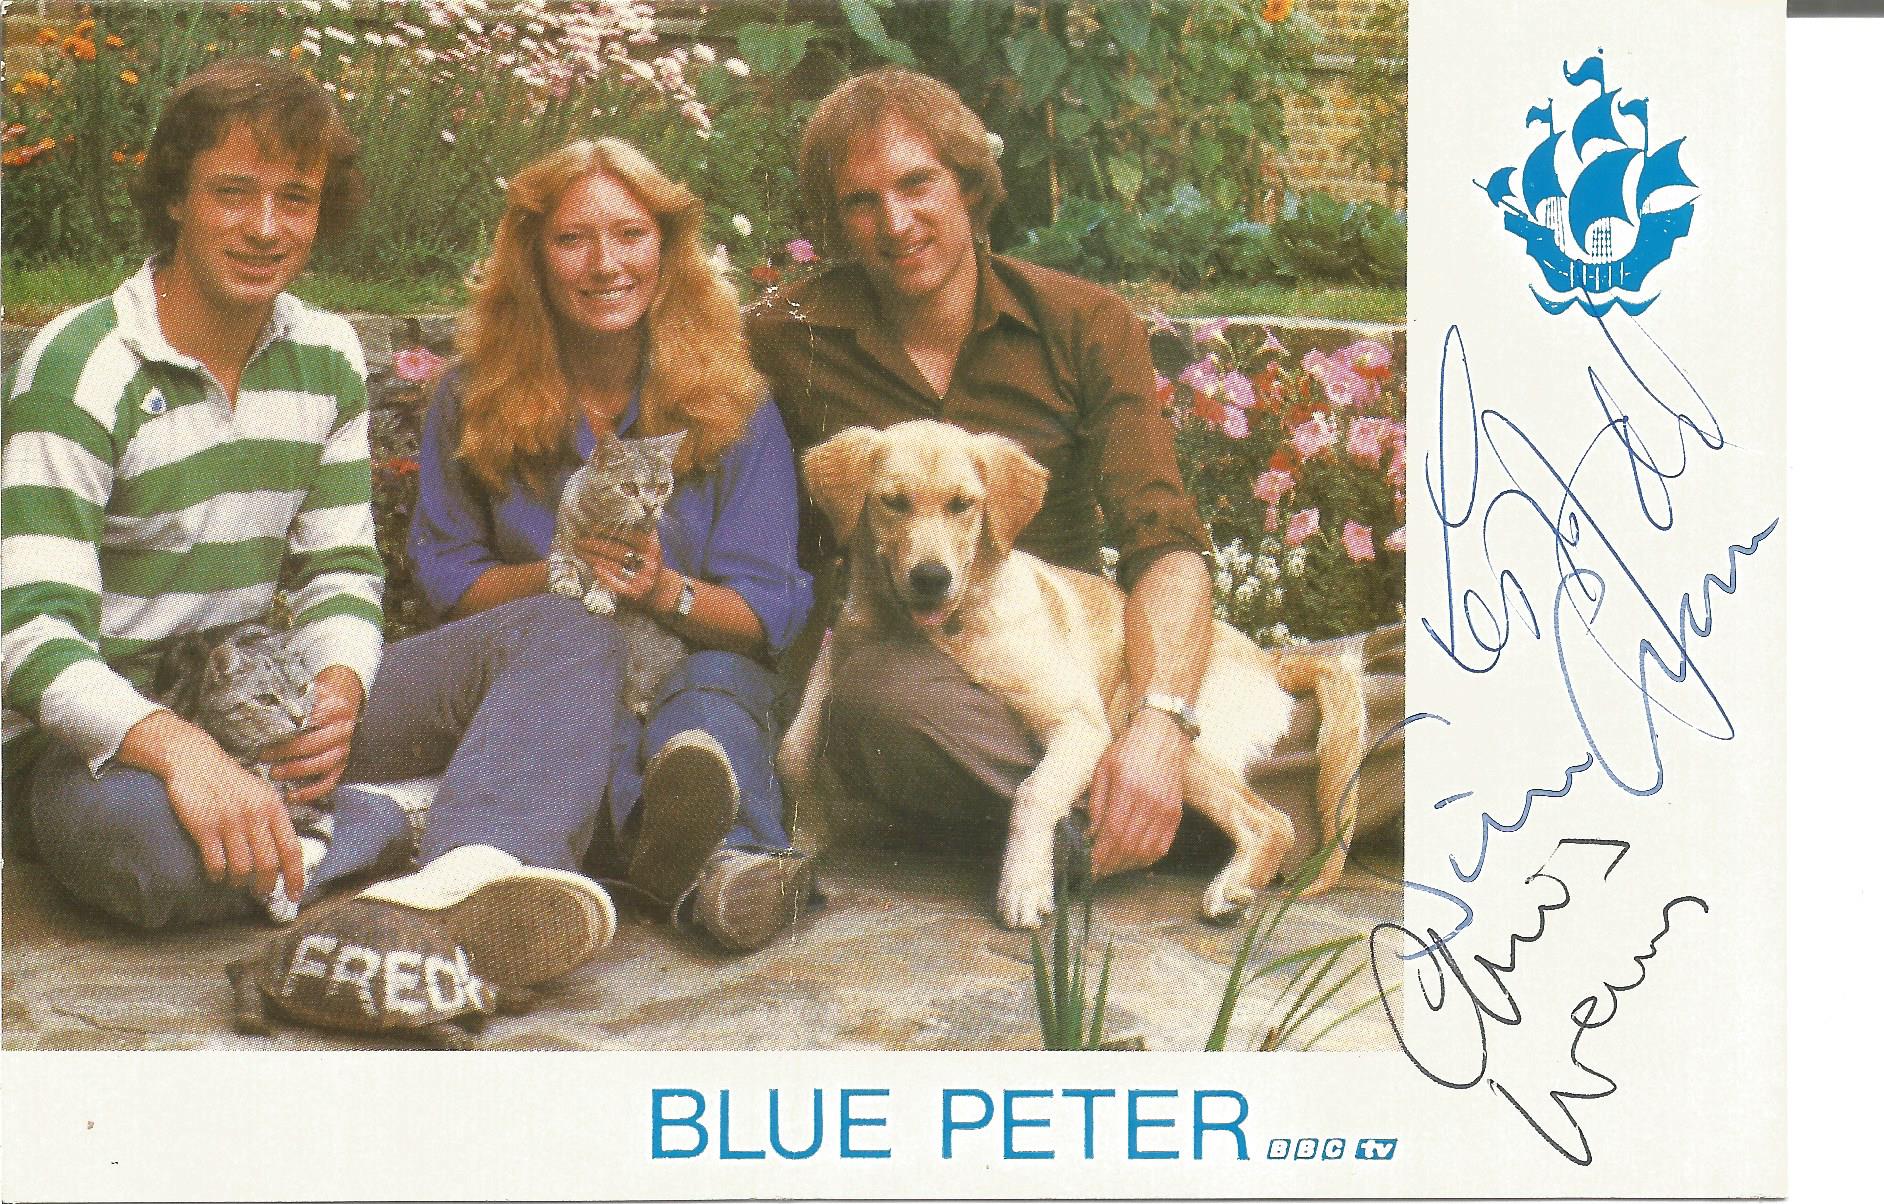 Blue Peter presenters multi signed 6x4 inch promo photo includes Lesley Judd, Simon Groom and